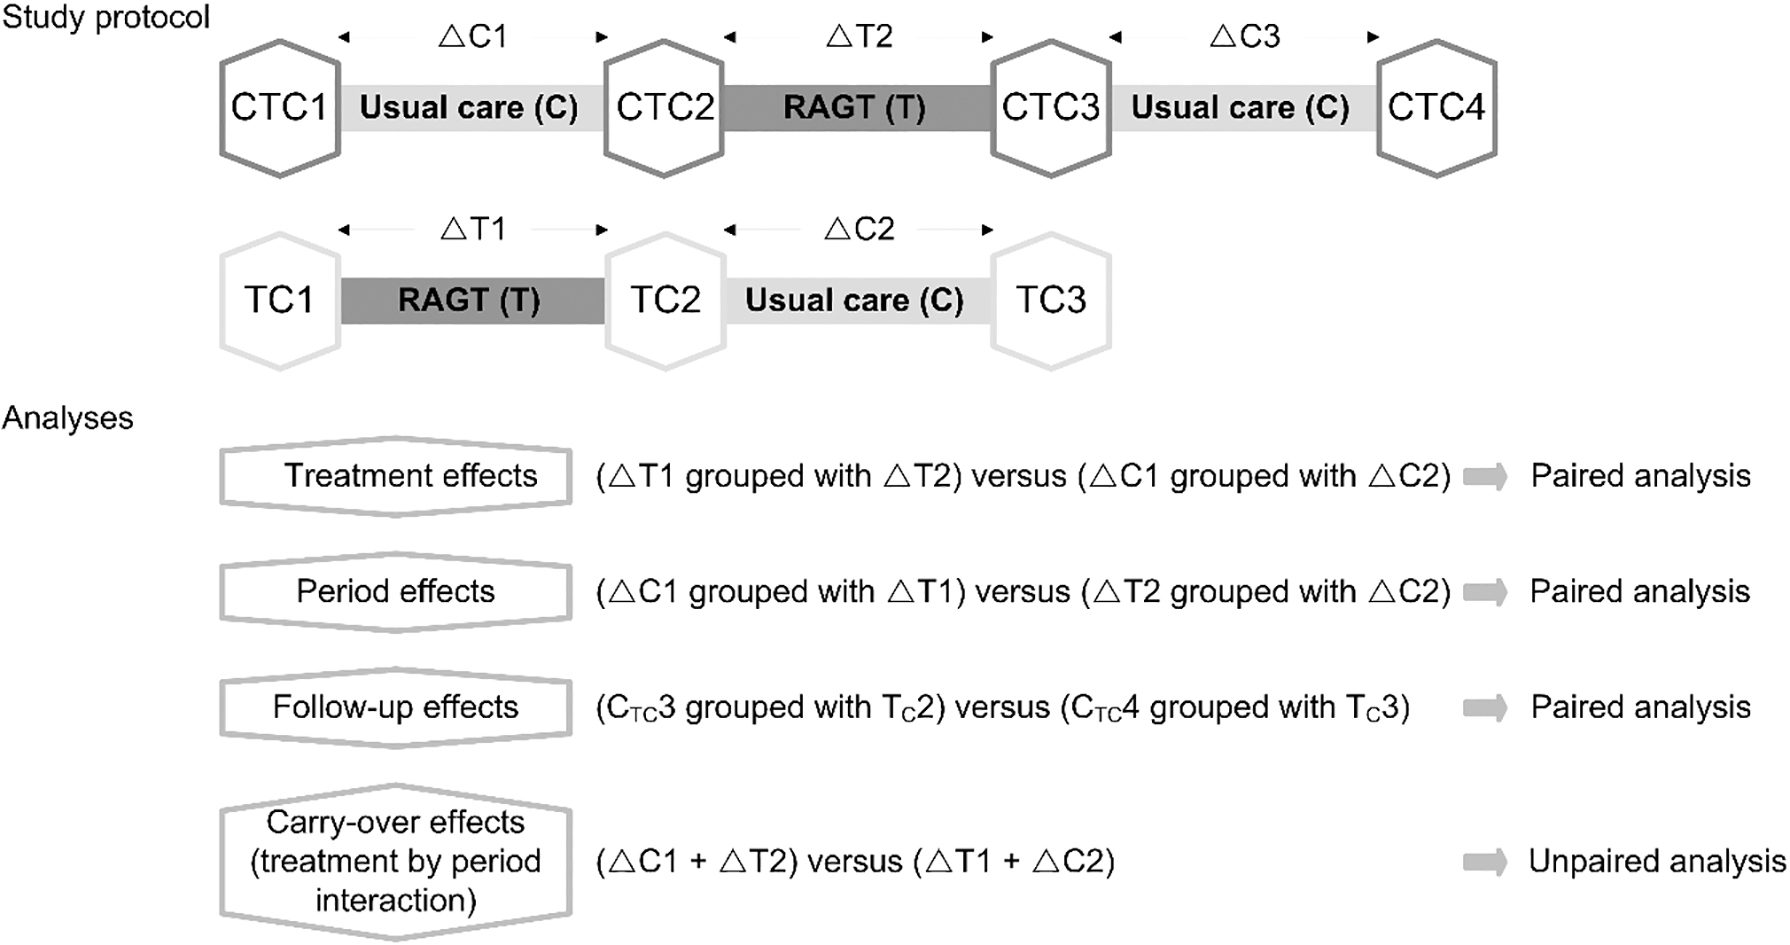 Overview of the study protocol and the statistical analyses. CTC1, baseline assessment in CTC-group; TC1, baseline assessment in TC-group; CTC2, intermediate assessment in CTC-group; TC2, intermediate assessment in TC-group; CTC3, end assessment in CTC-group; TC3, end assessment in TC-group; CTC4, follow-up assessment in CTC-group; ΔC1, change during usual care in CTC-group; ΔC2, change during usual care in TC-group; ΔC3, change during follow-up in CTC-group; ΔT1, change during robot-assisted gait training in TC-group; ΔT2, change during robot-assisted gait training in CTC-group.